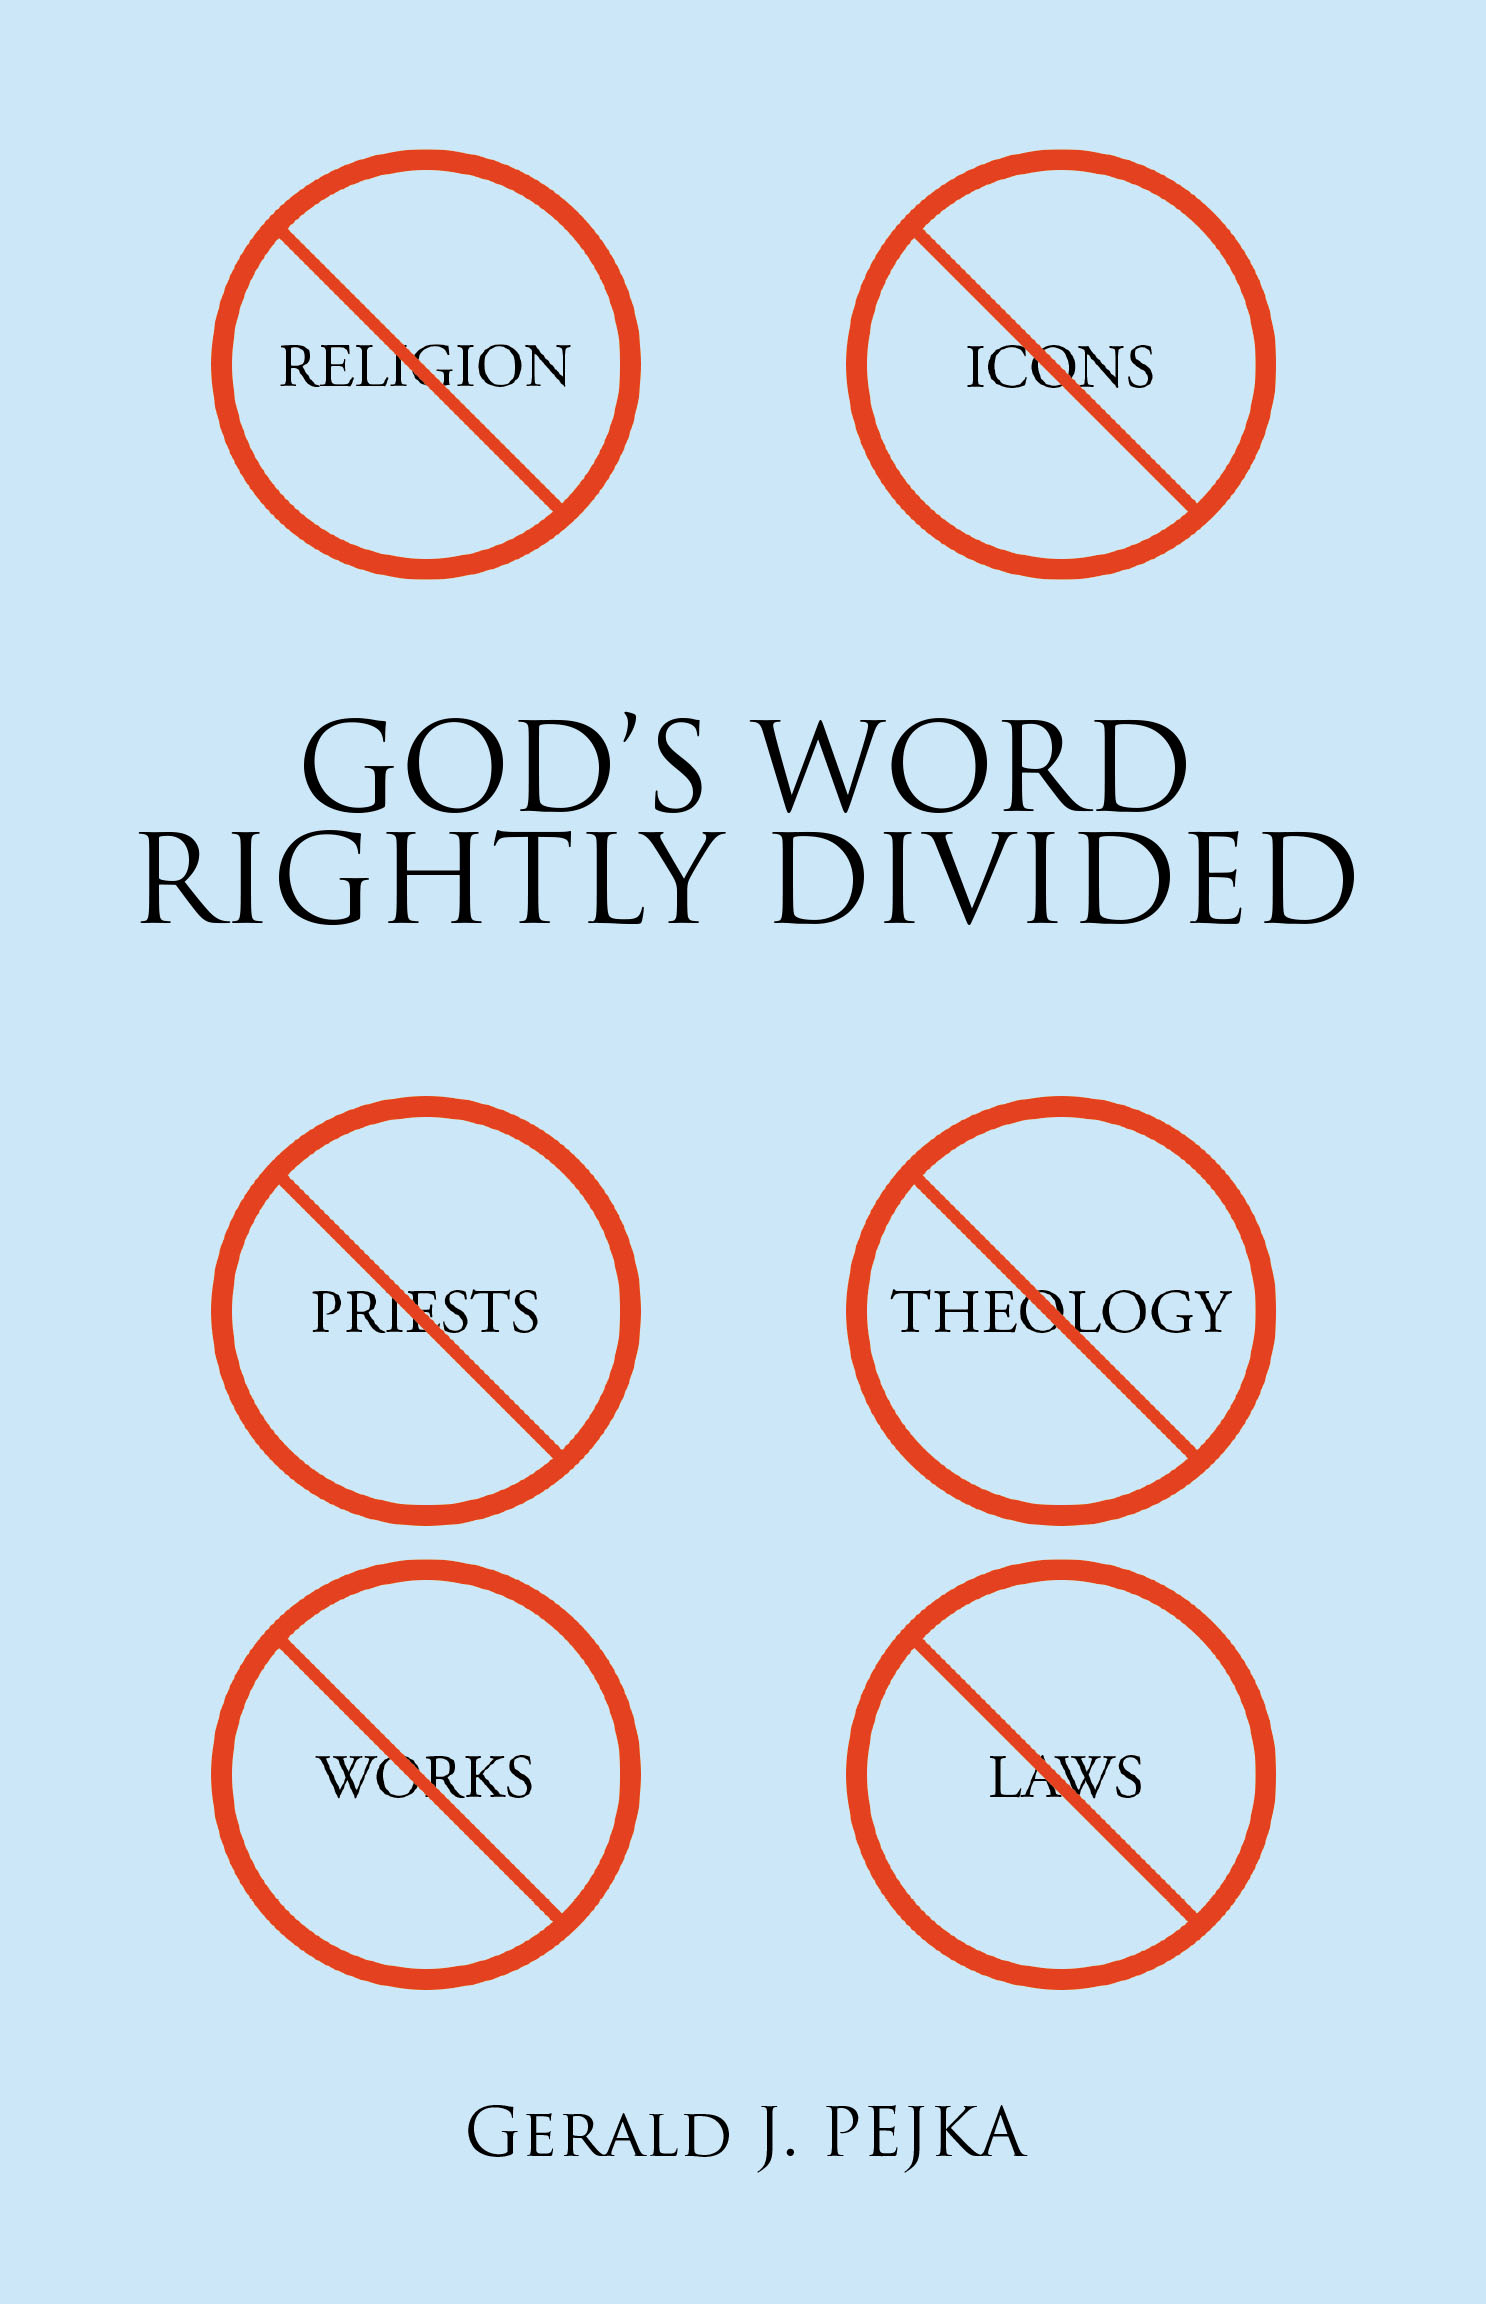 Gerald J. Pejka’s New Book, "God's Word: Rightly Divided," is Designed to Encourage an Unbiased Study of the Word of God, Free from the Mindset of Religion